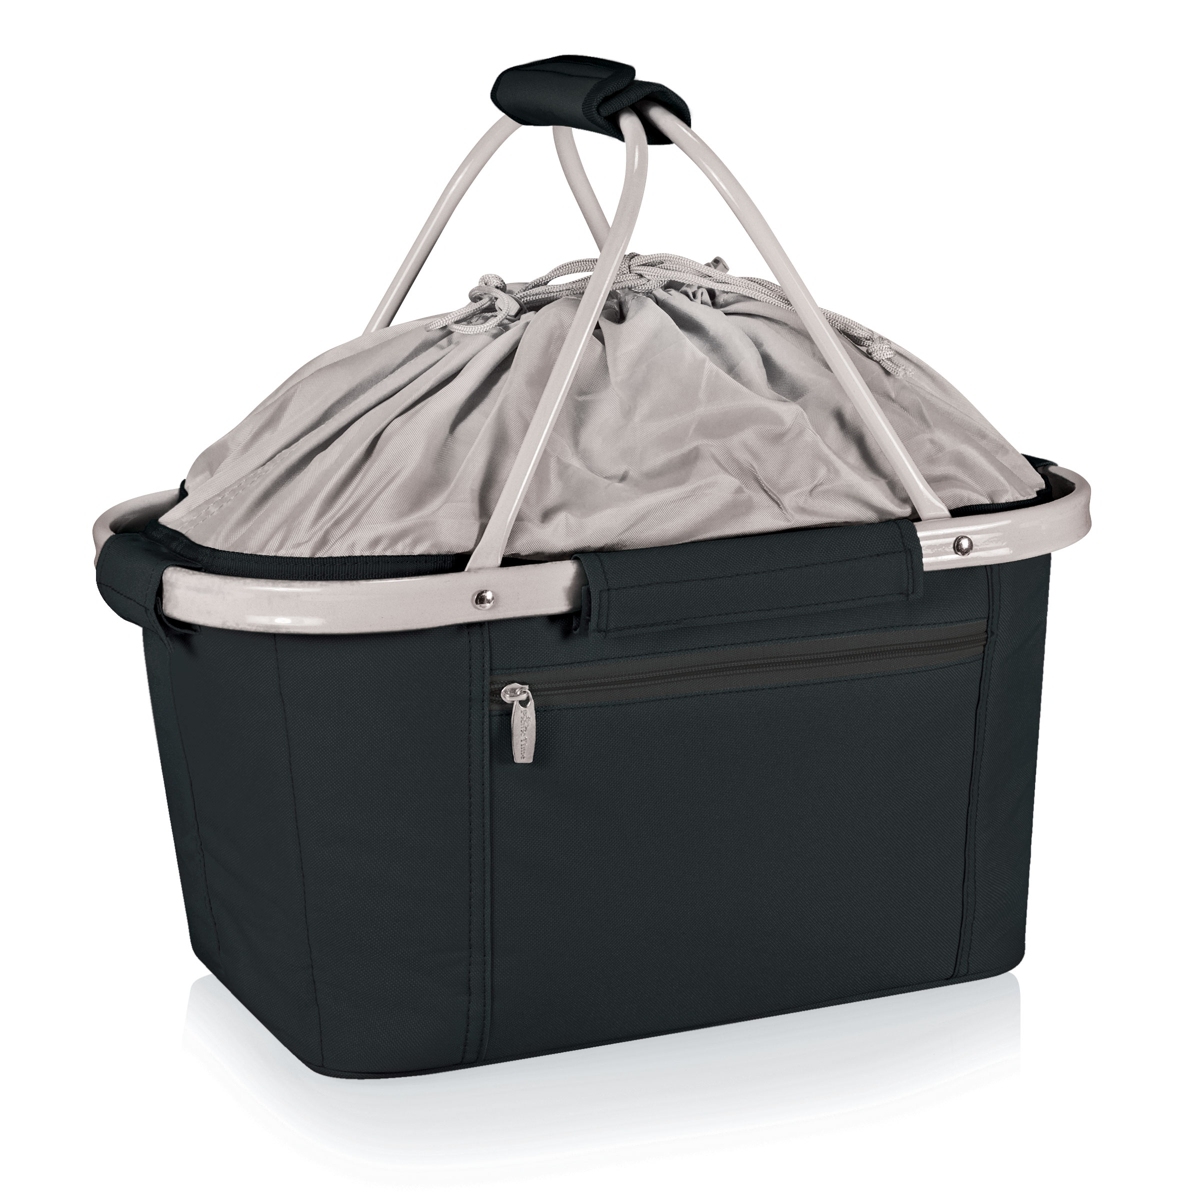 by Picnic Time Metro Black Basket Collapsible Cooler Tote - Black